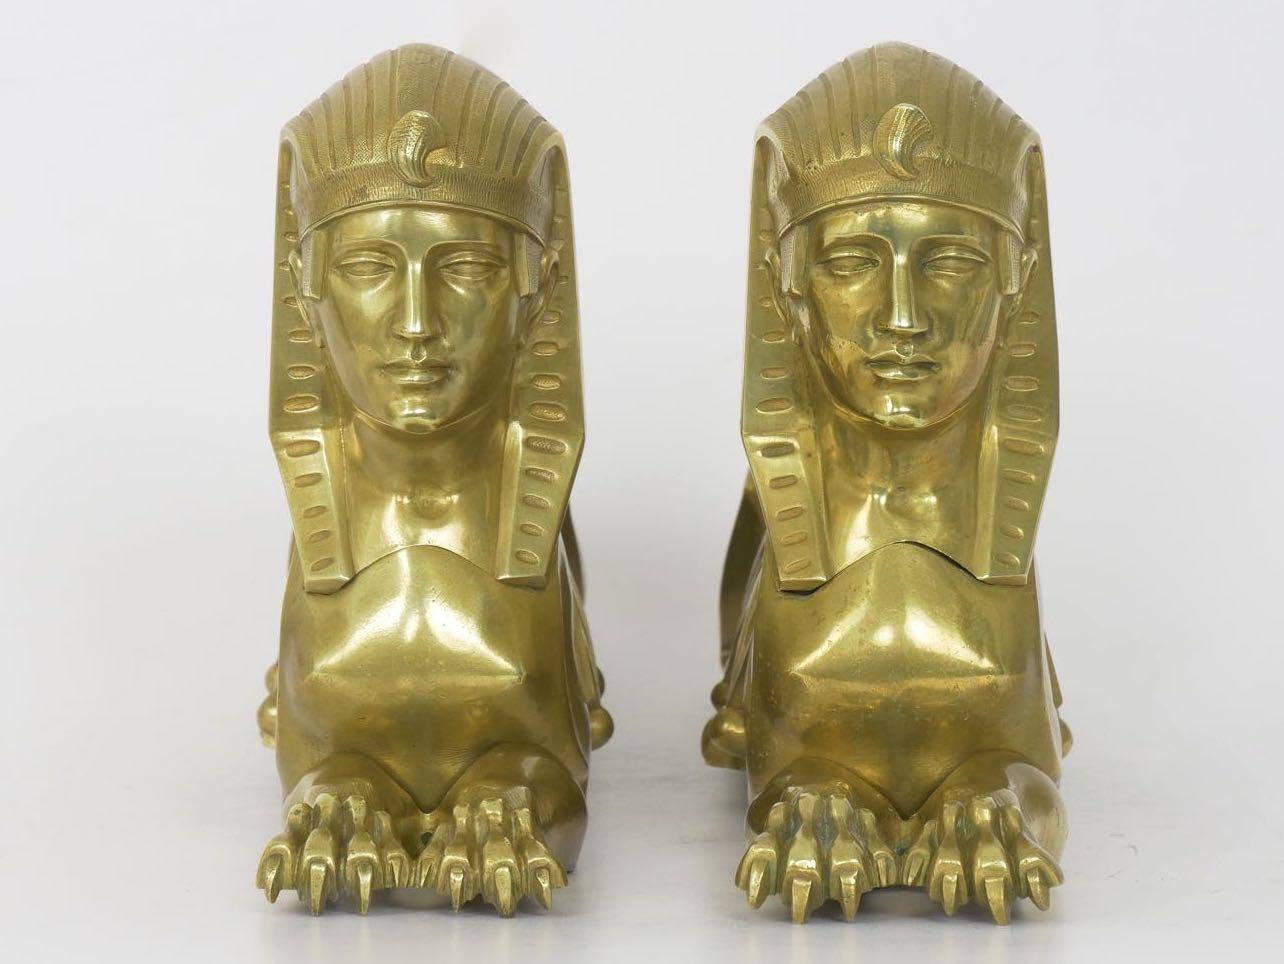 Pair of French Egyptian Revival Sphinx Figural Bronze Sculpture Chenets 10